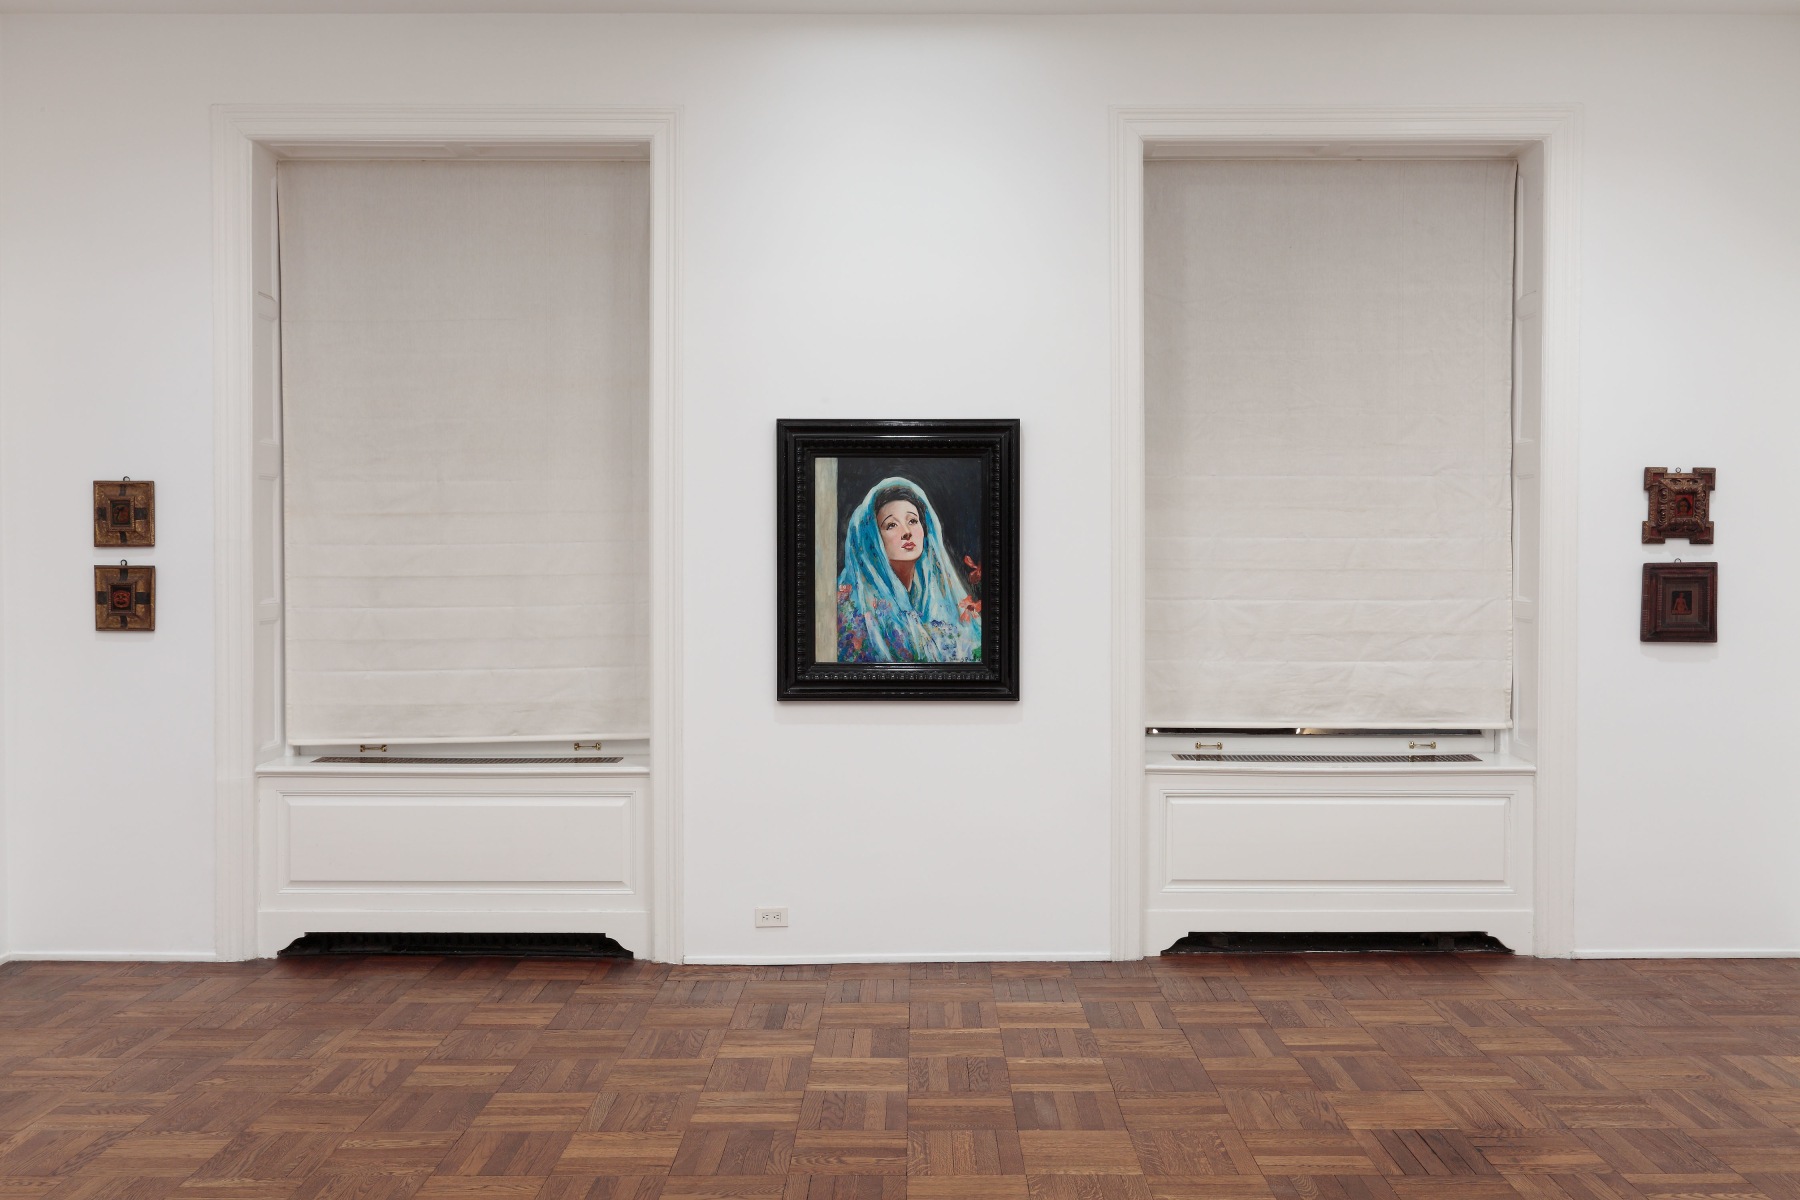 Francis Picabia, Late Paintings, New York, 2011-2012, Installation Image 7